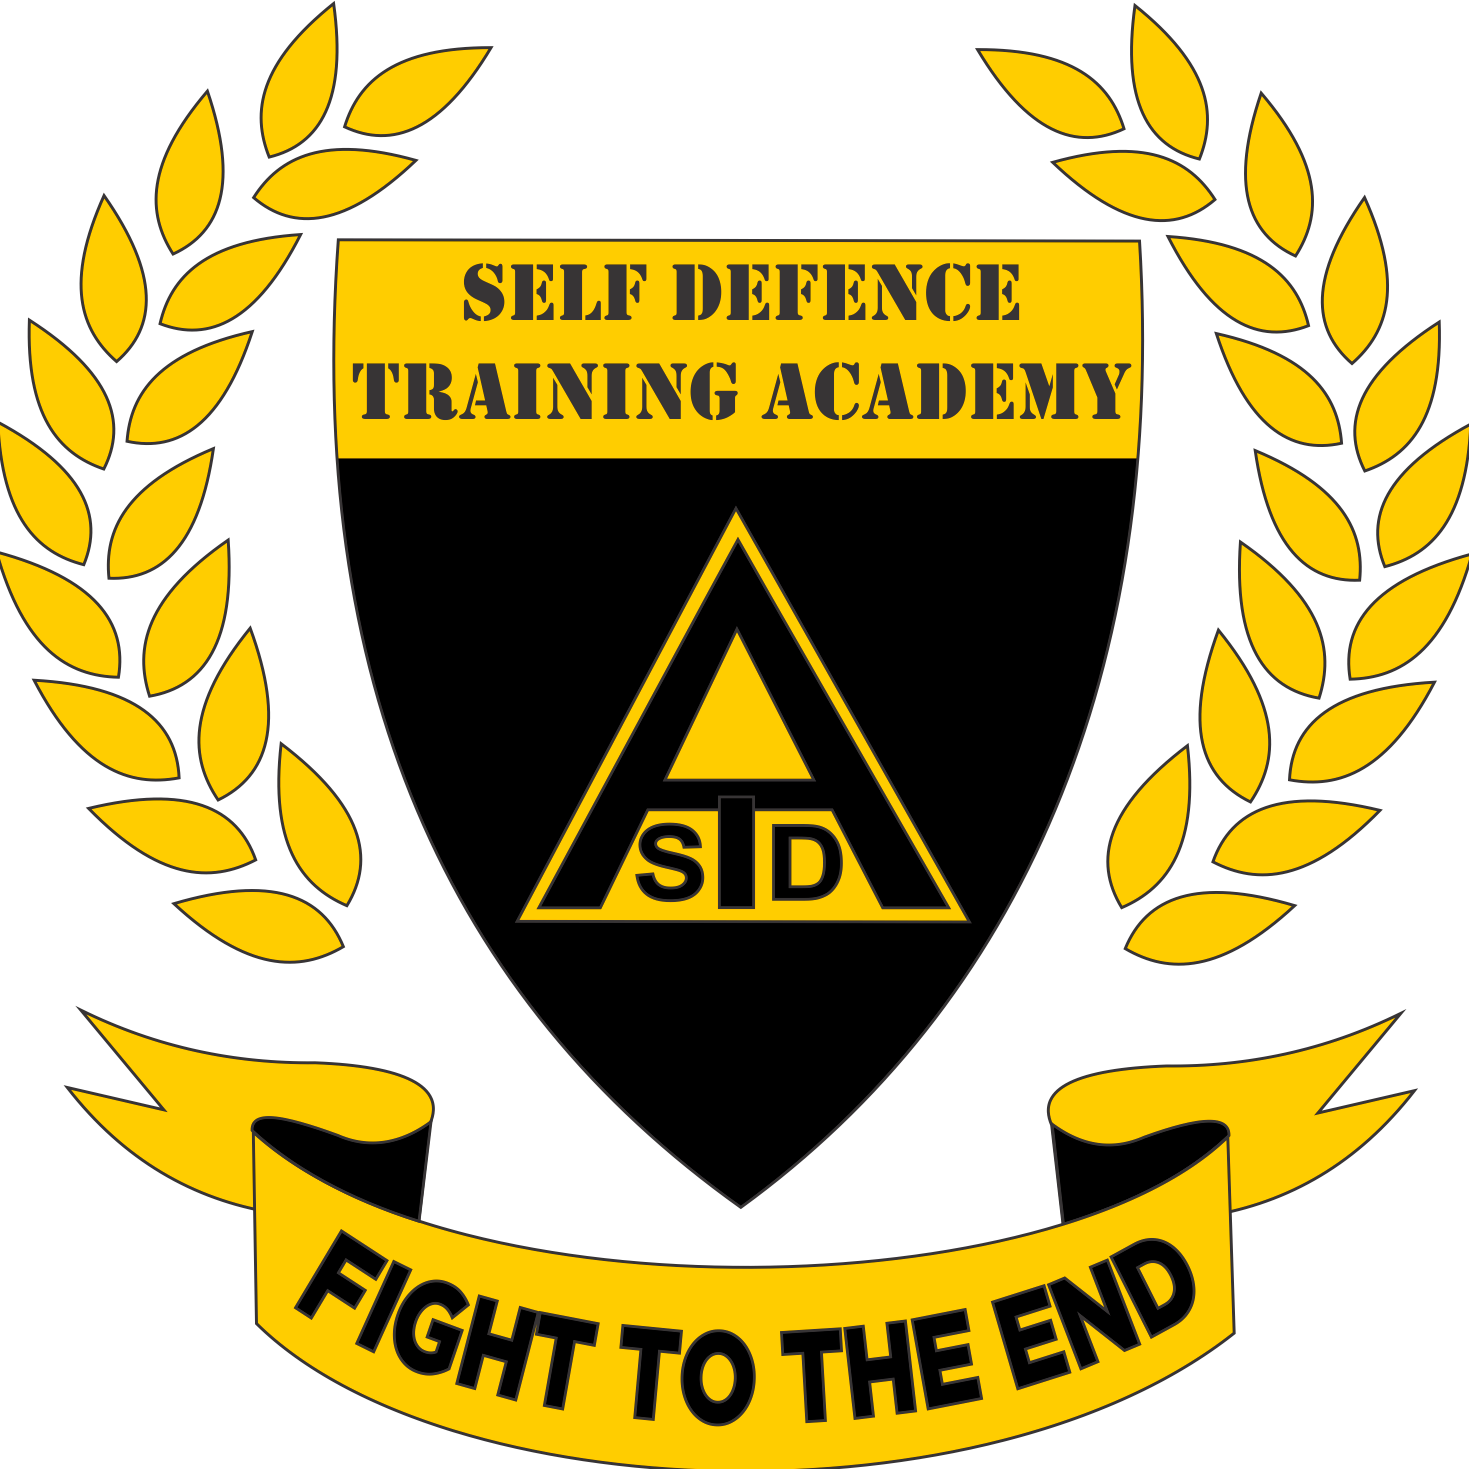 #SDTA teach realistic & effective #selfdefencetraining techniques to everyone aged 13+ in Gauteng, South Africa #BeYourOwnHero #NoFear #EyesOpen #FightToTheEnd